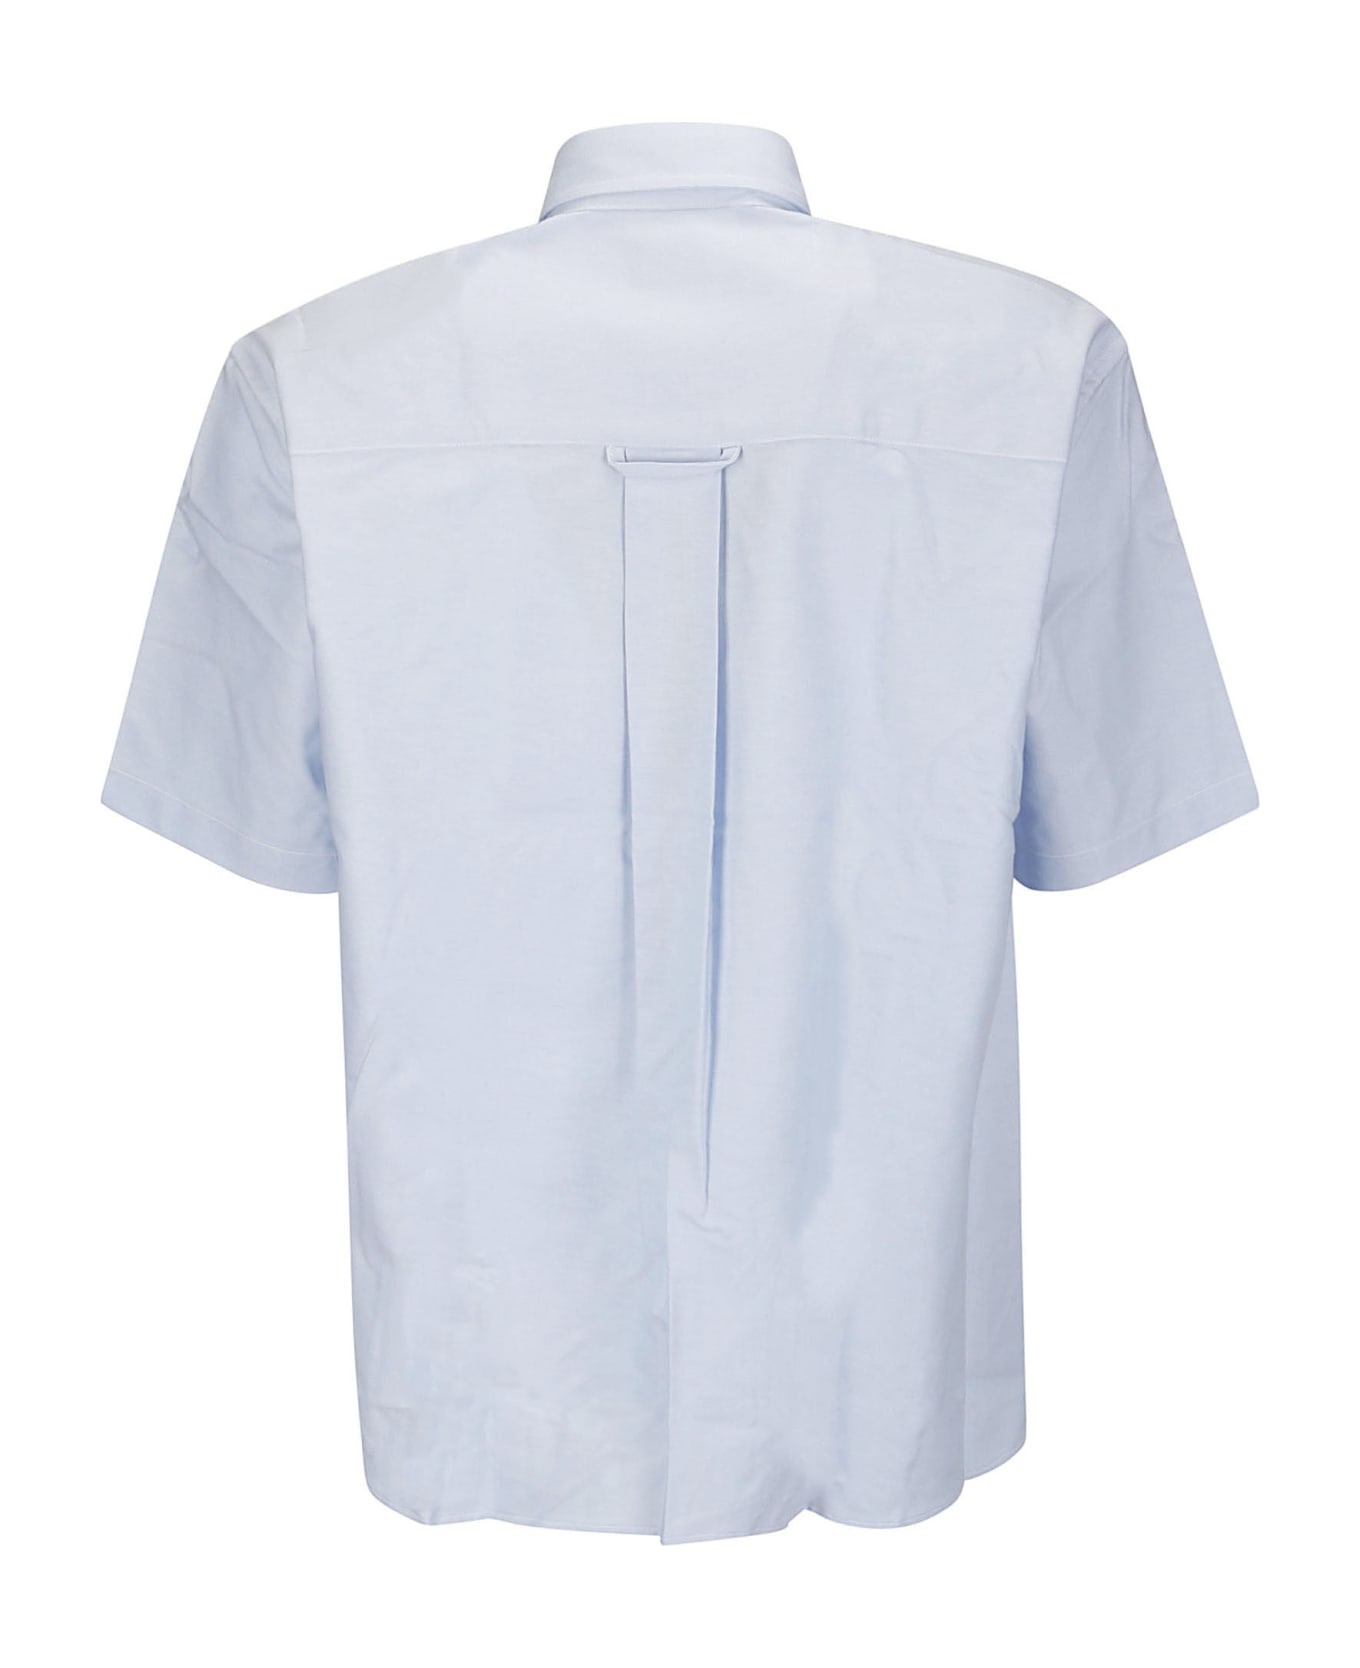 Fuct Ss Workwear Shirt - COUNTRY AIR